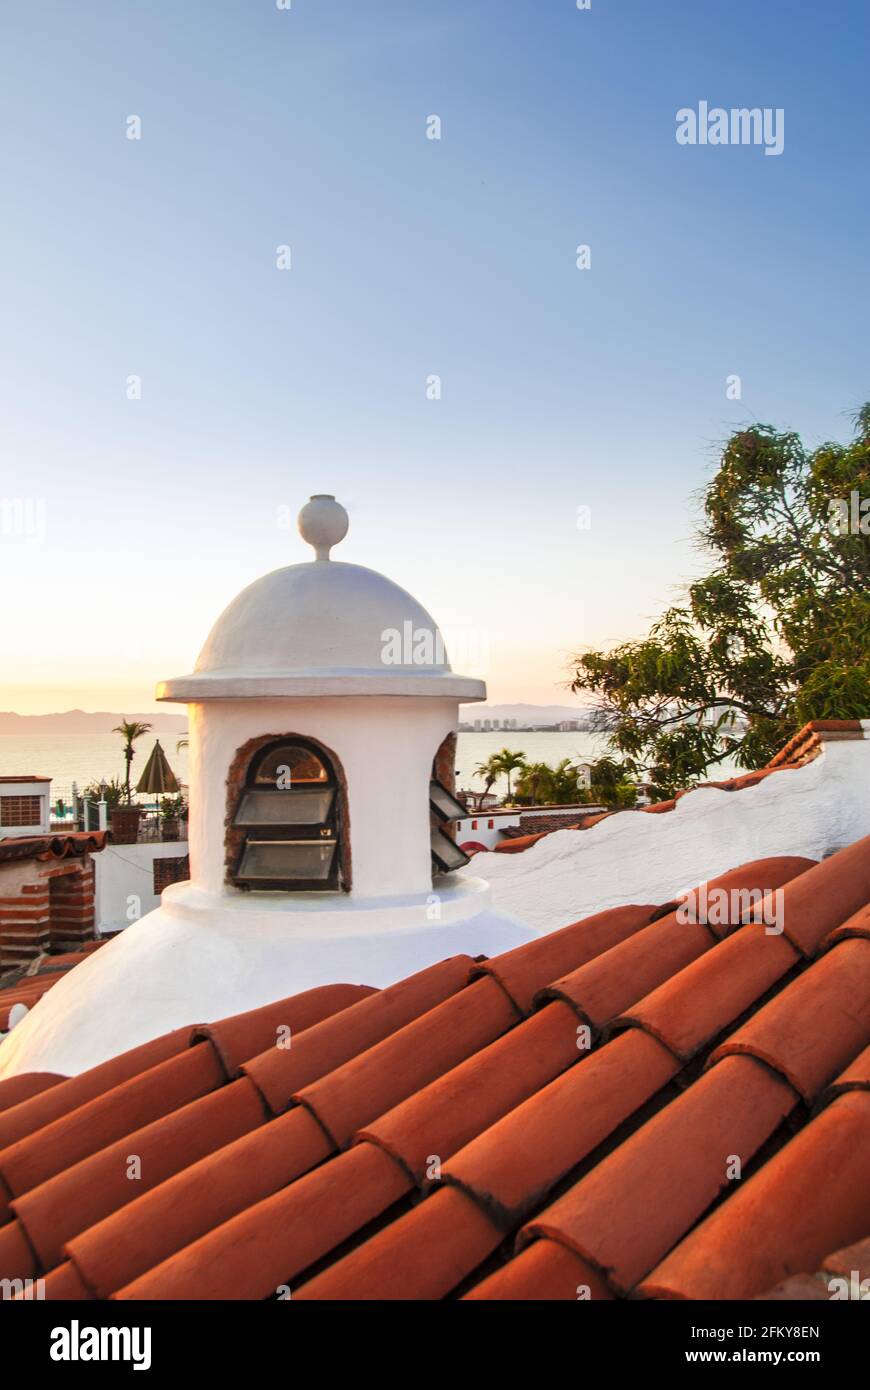 Rooftop cupolas are an icon of the colonial urban architecture in “Romantic Zone” of Puerto Vallarta, Jalisco, Mexico. #613PV Stock Photo